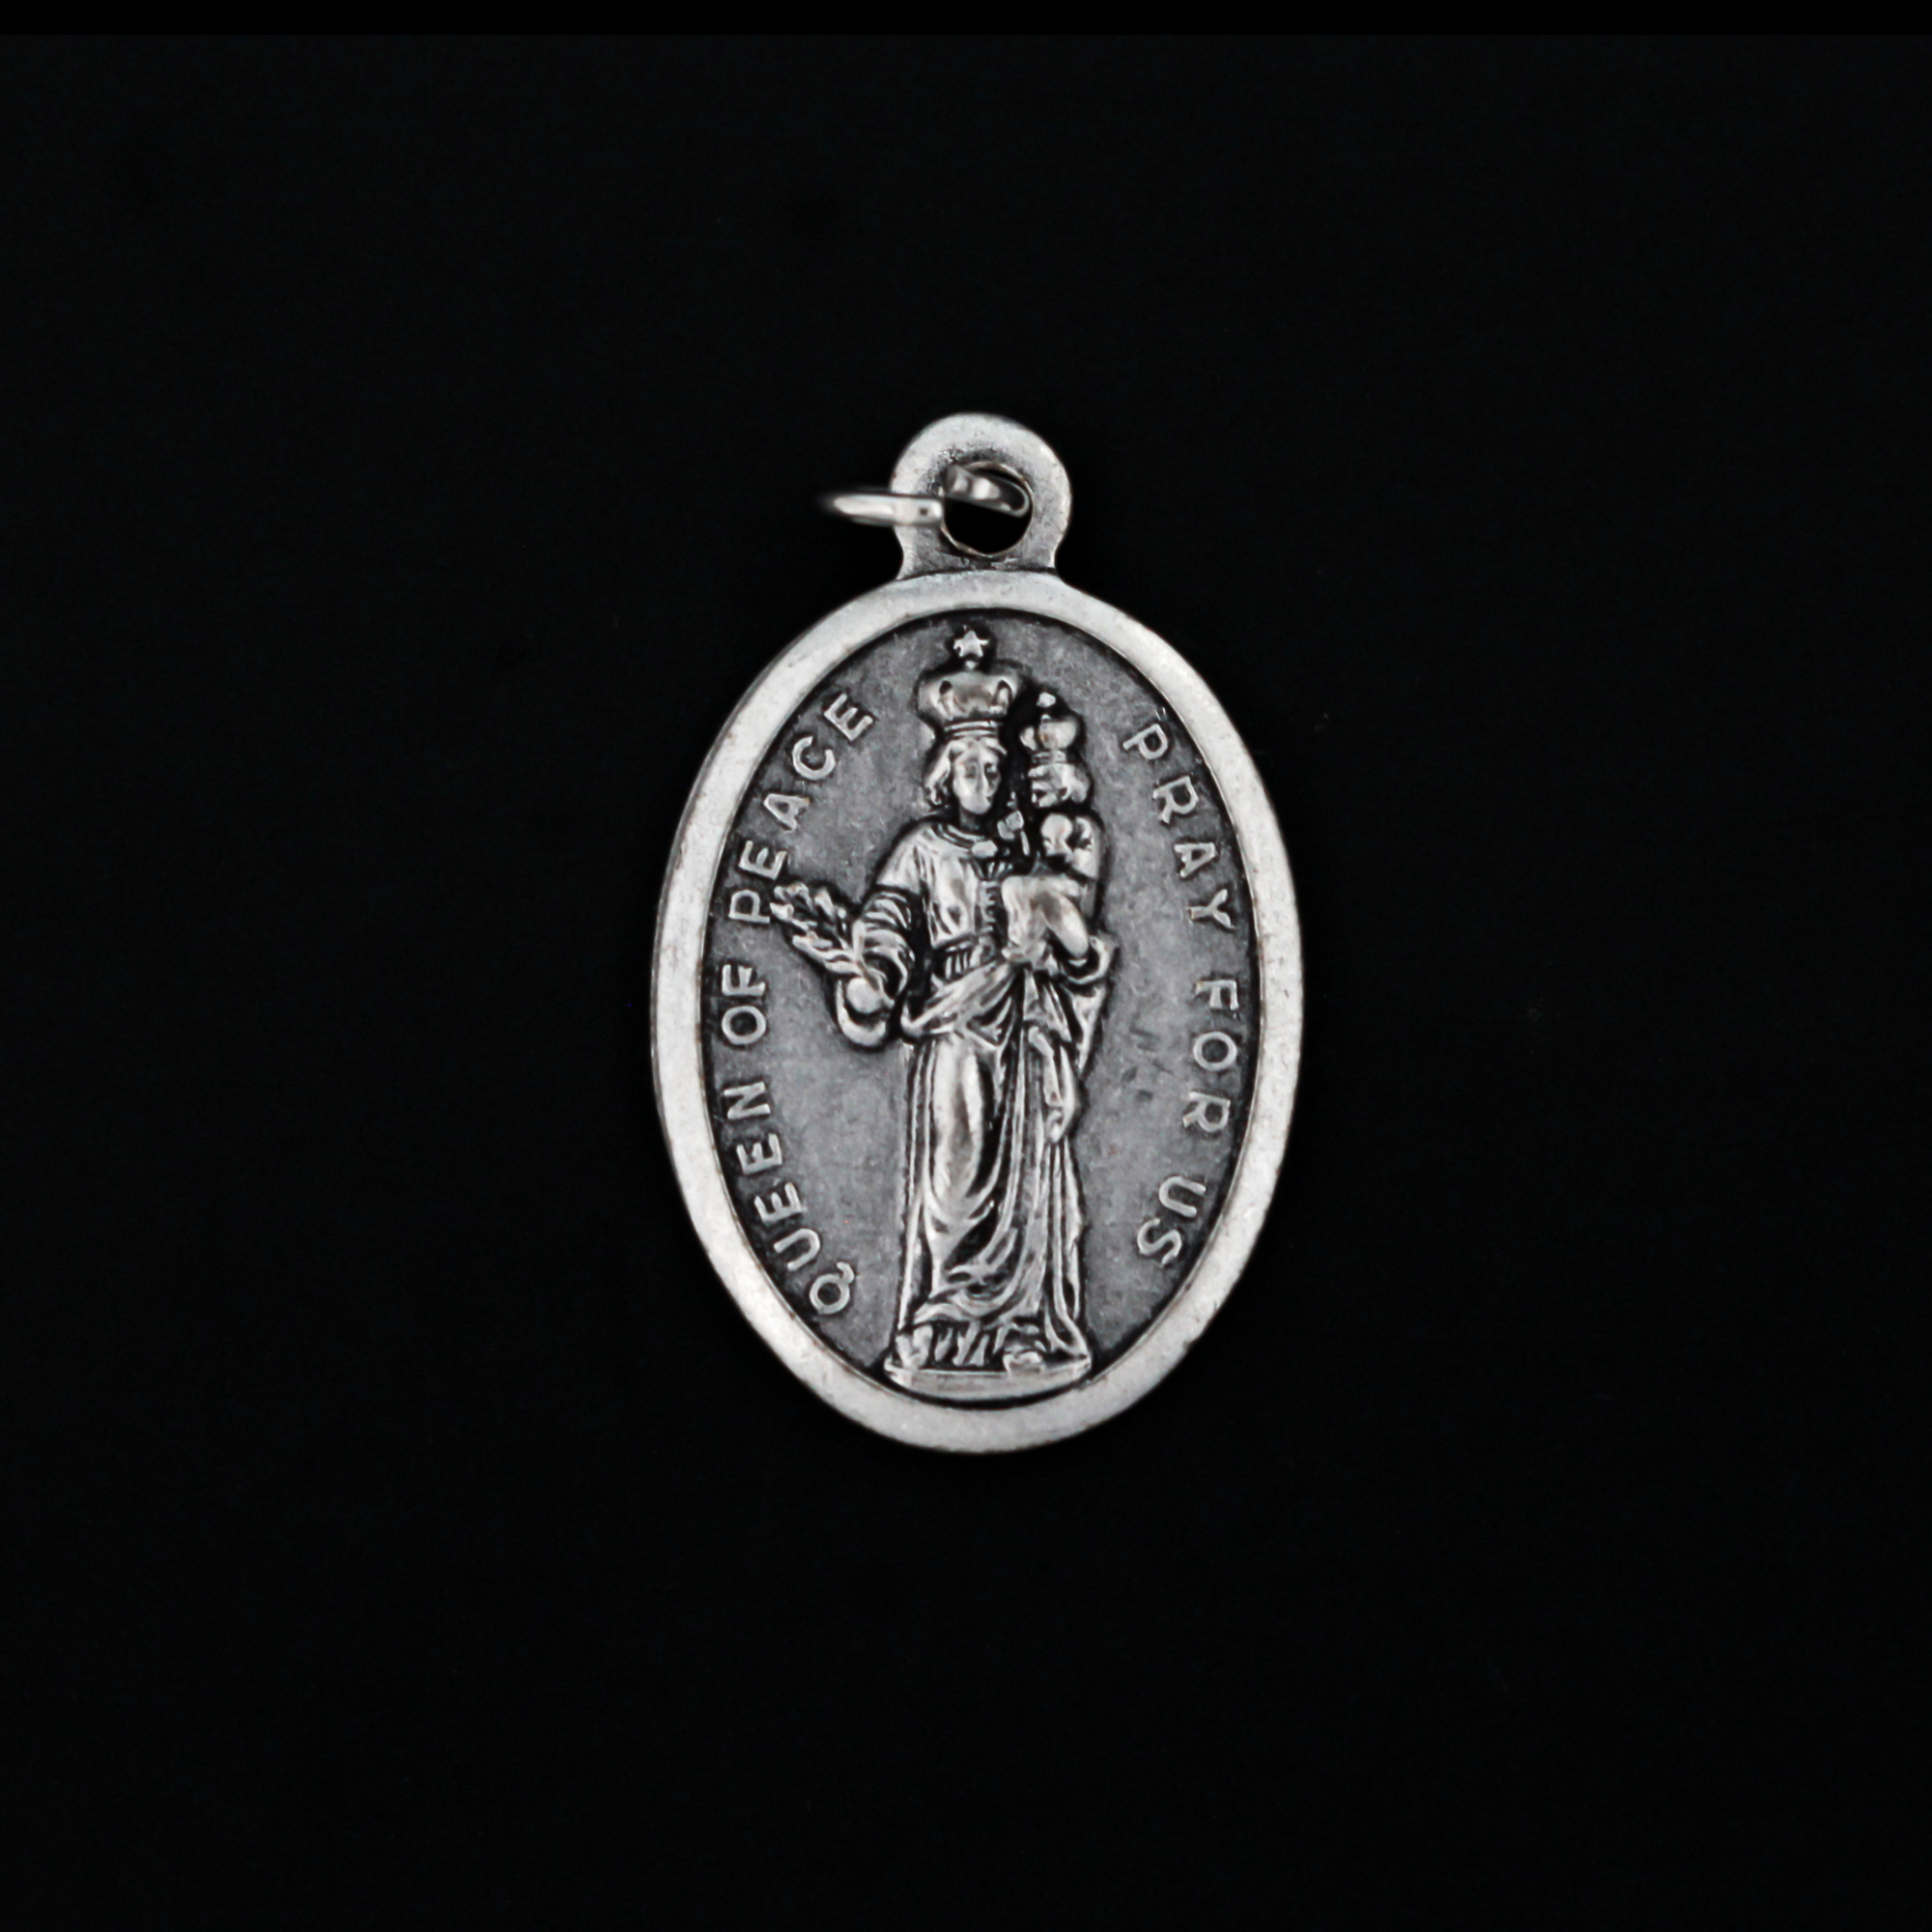 Our Lady Queen of Peace Medal - Patron of Peace, Hawaii, and Maine